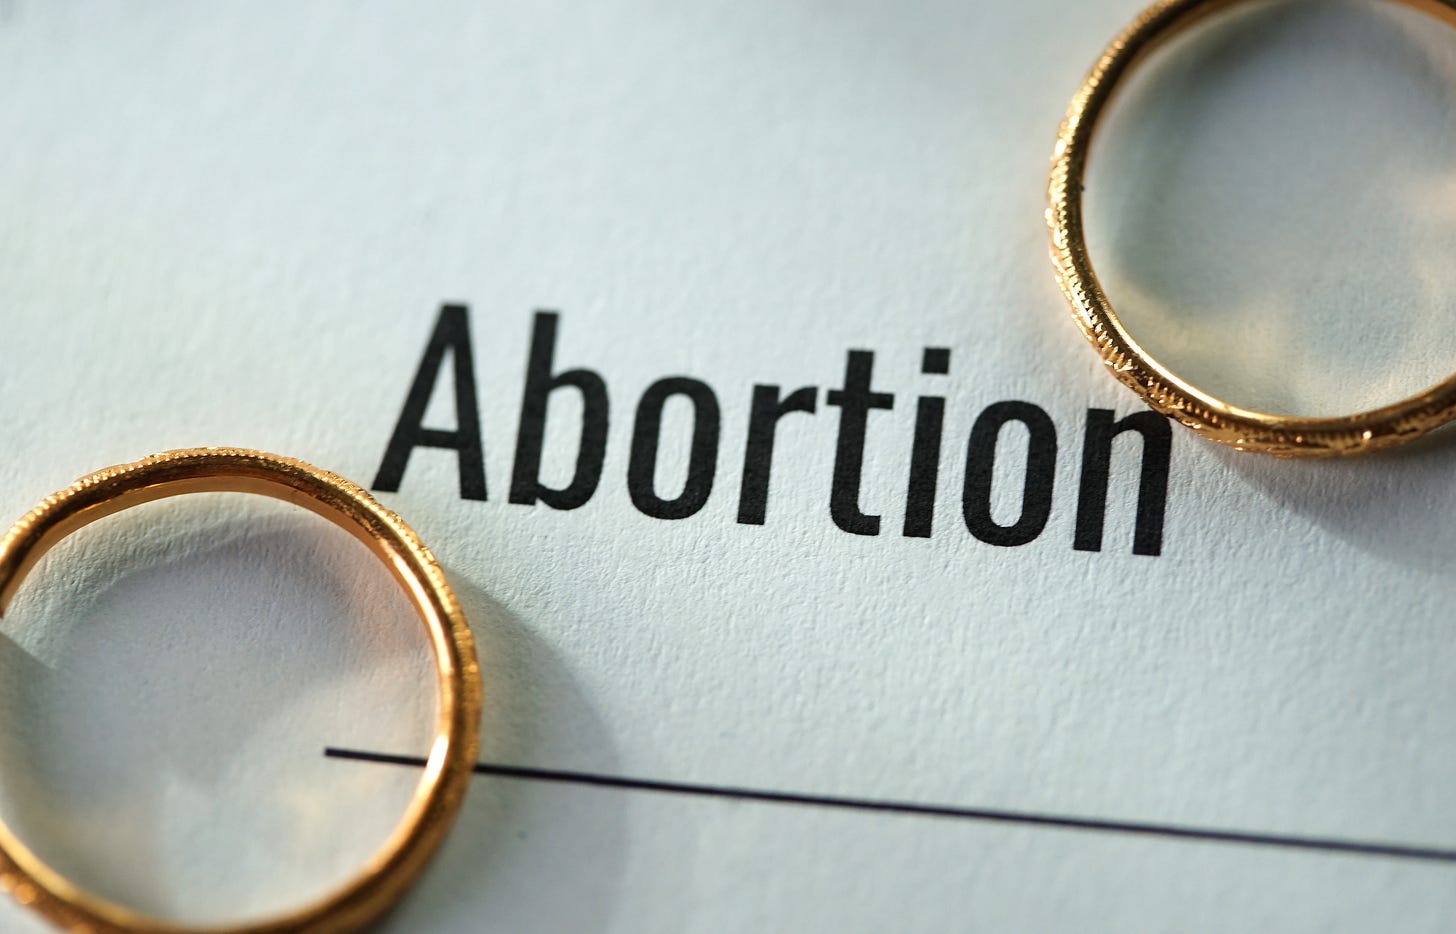 Word "Abortion" - article on men and abortion